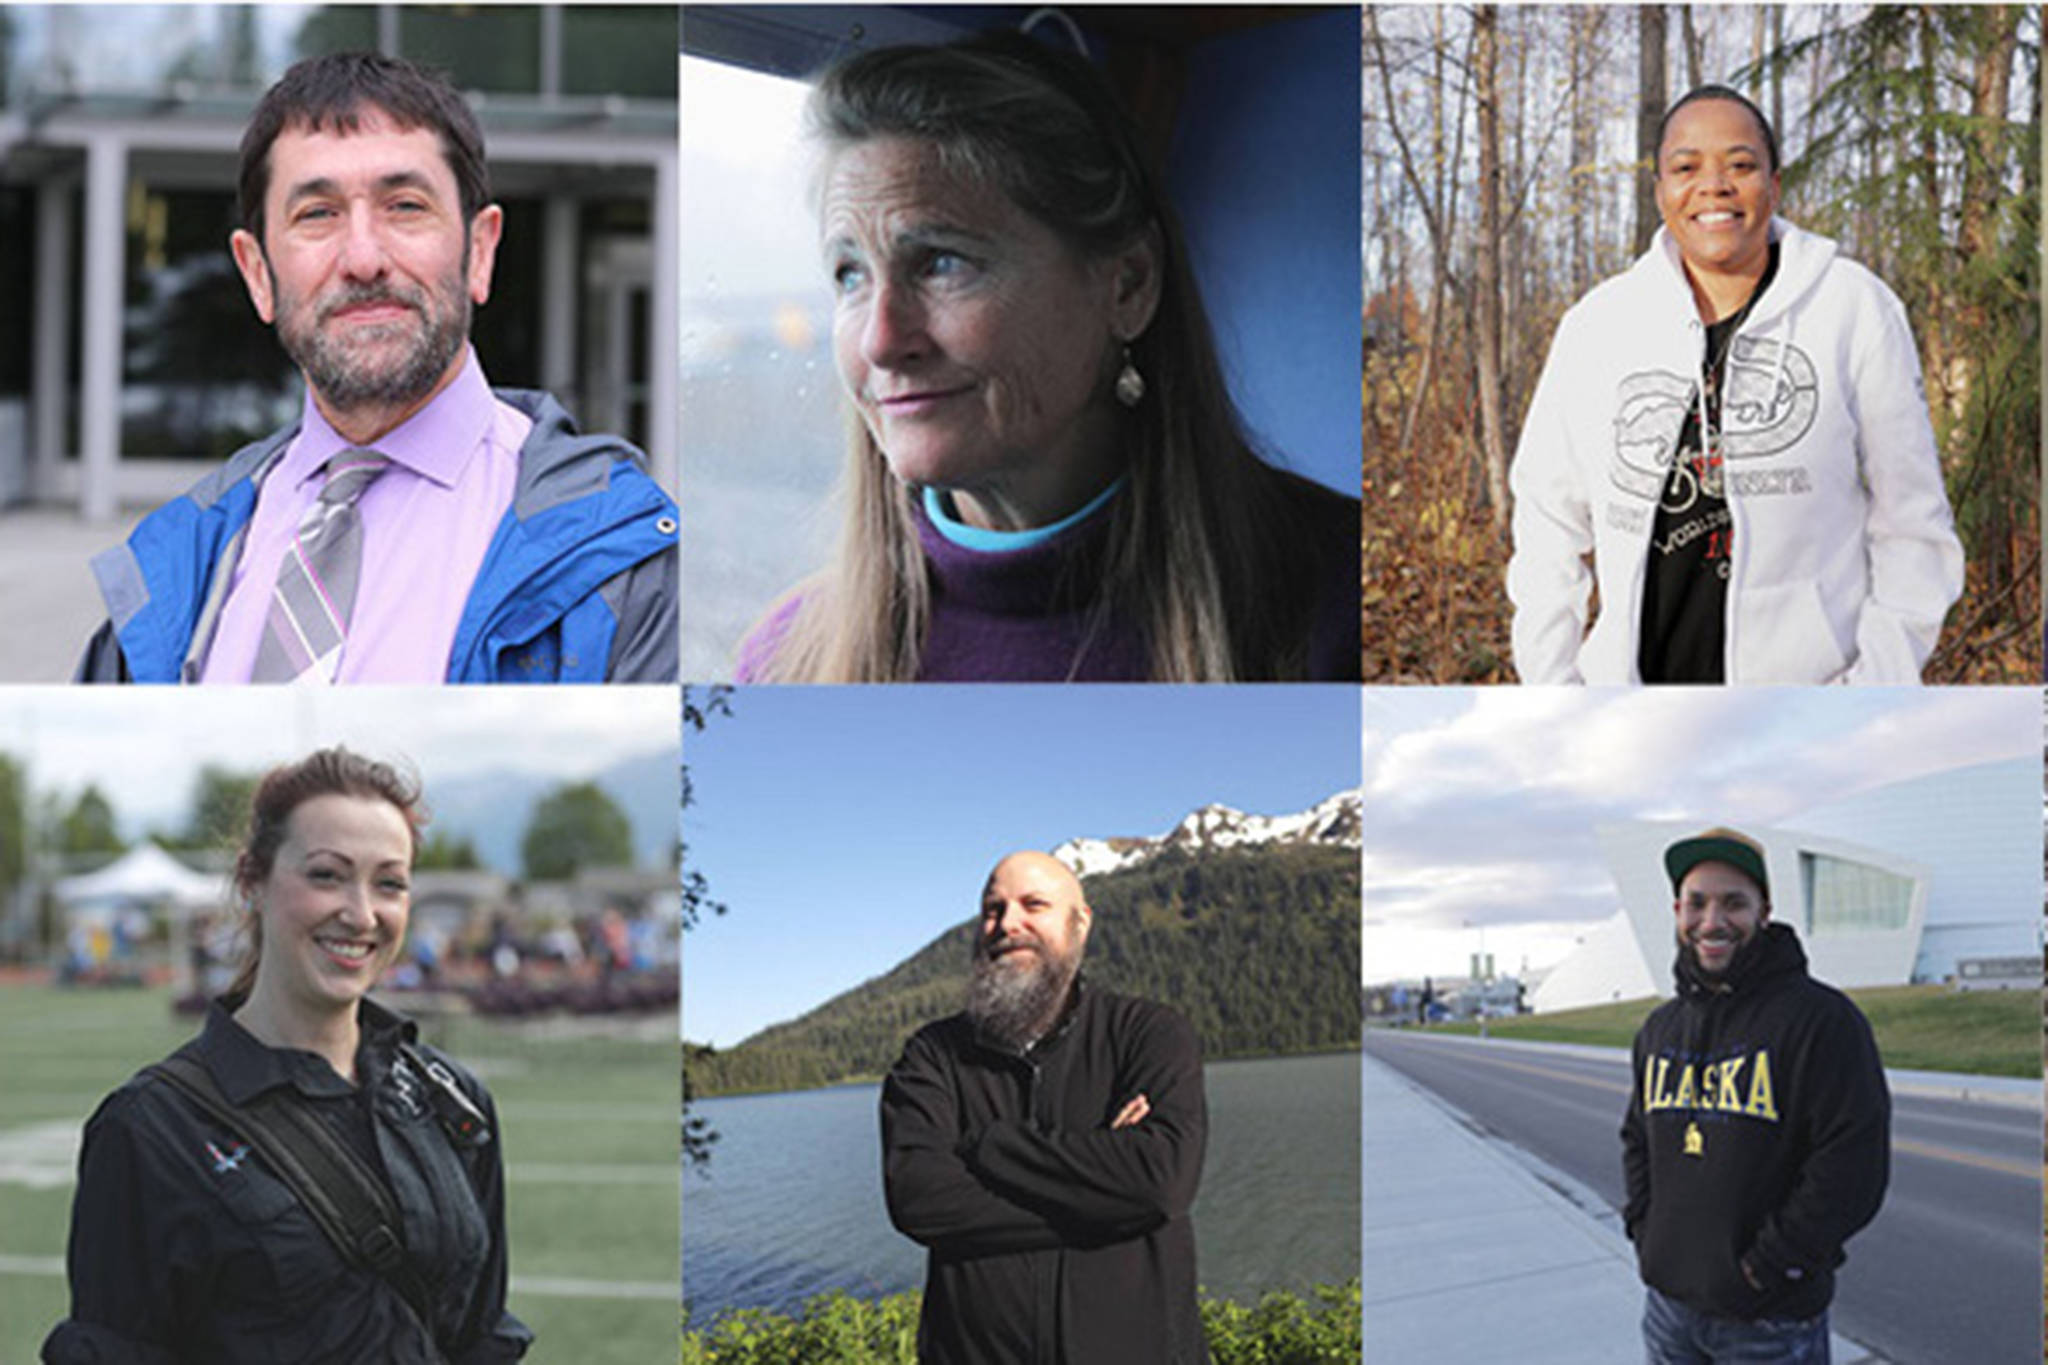 Alaskans share recovery stories in new web video series